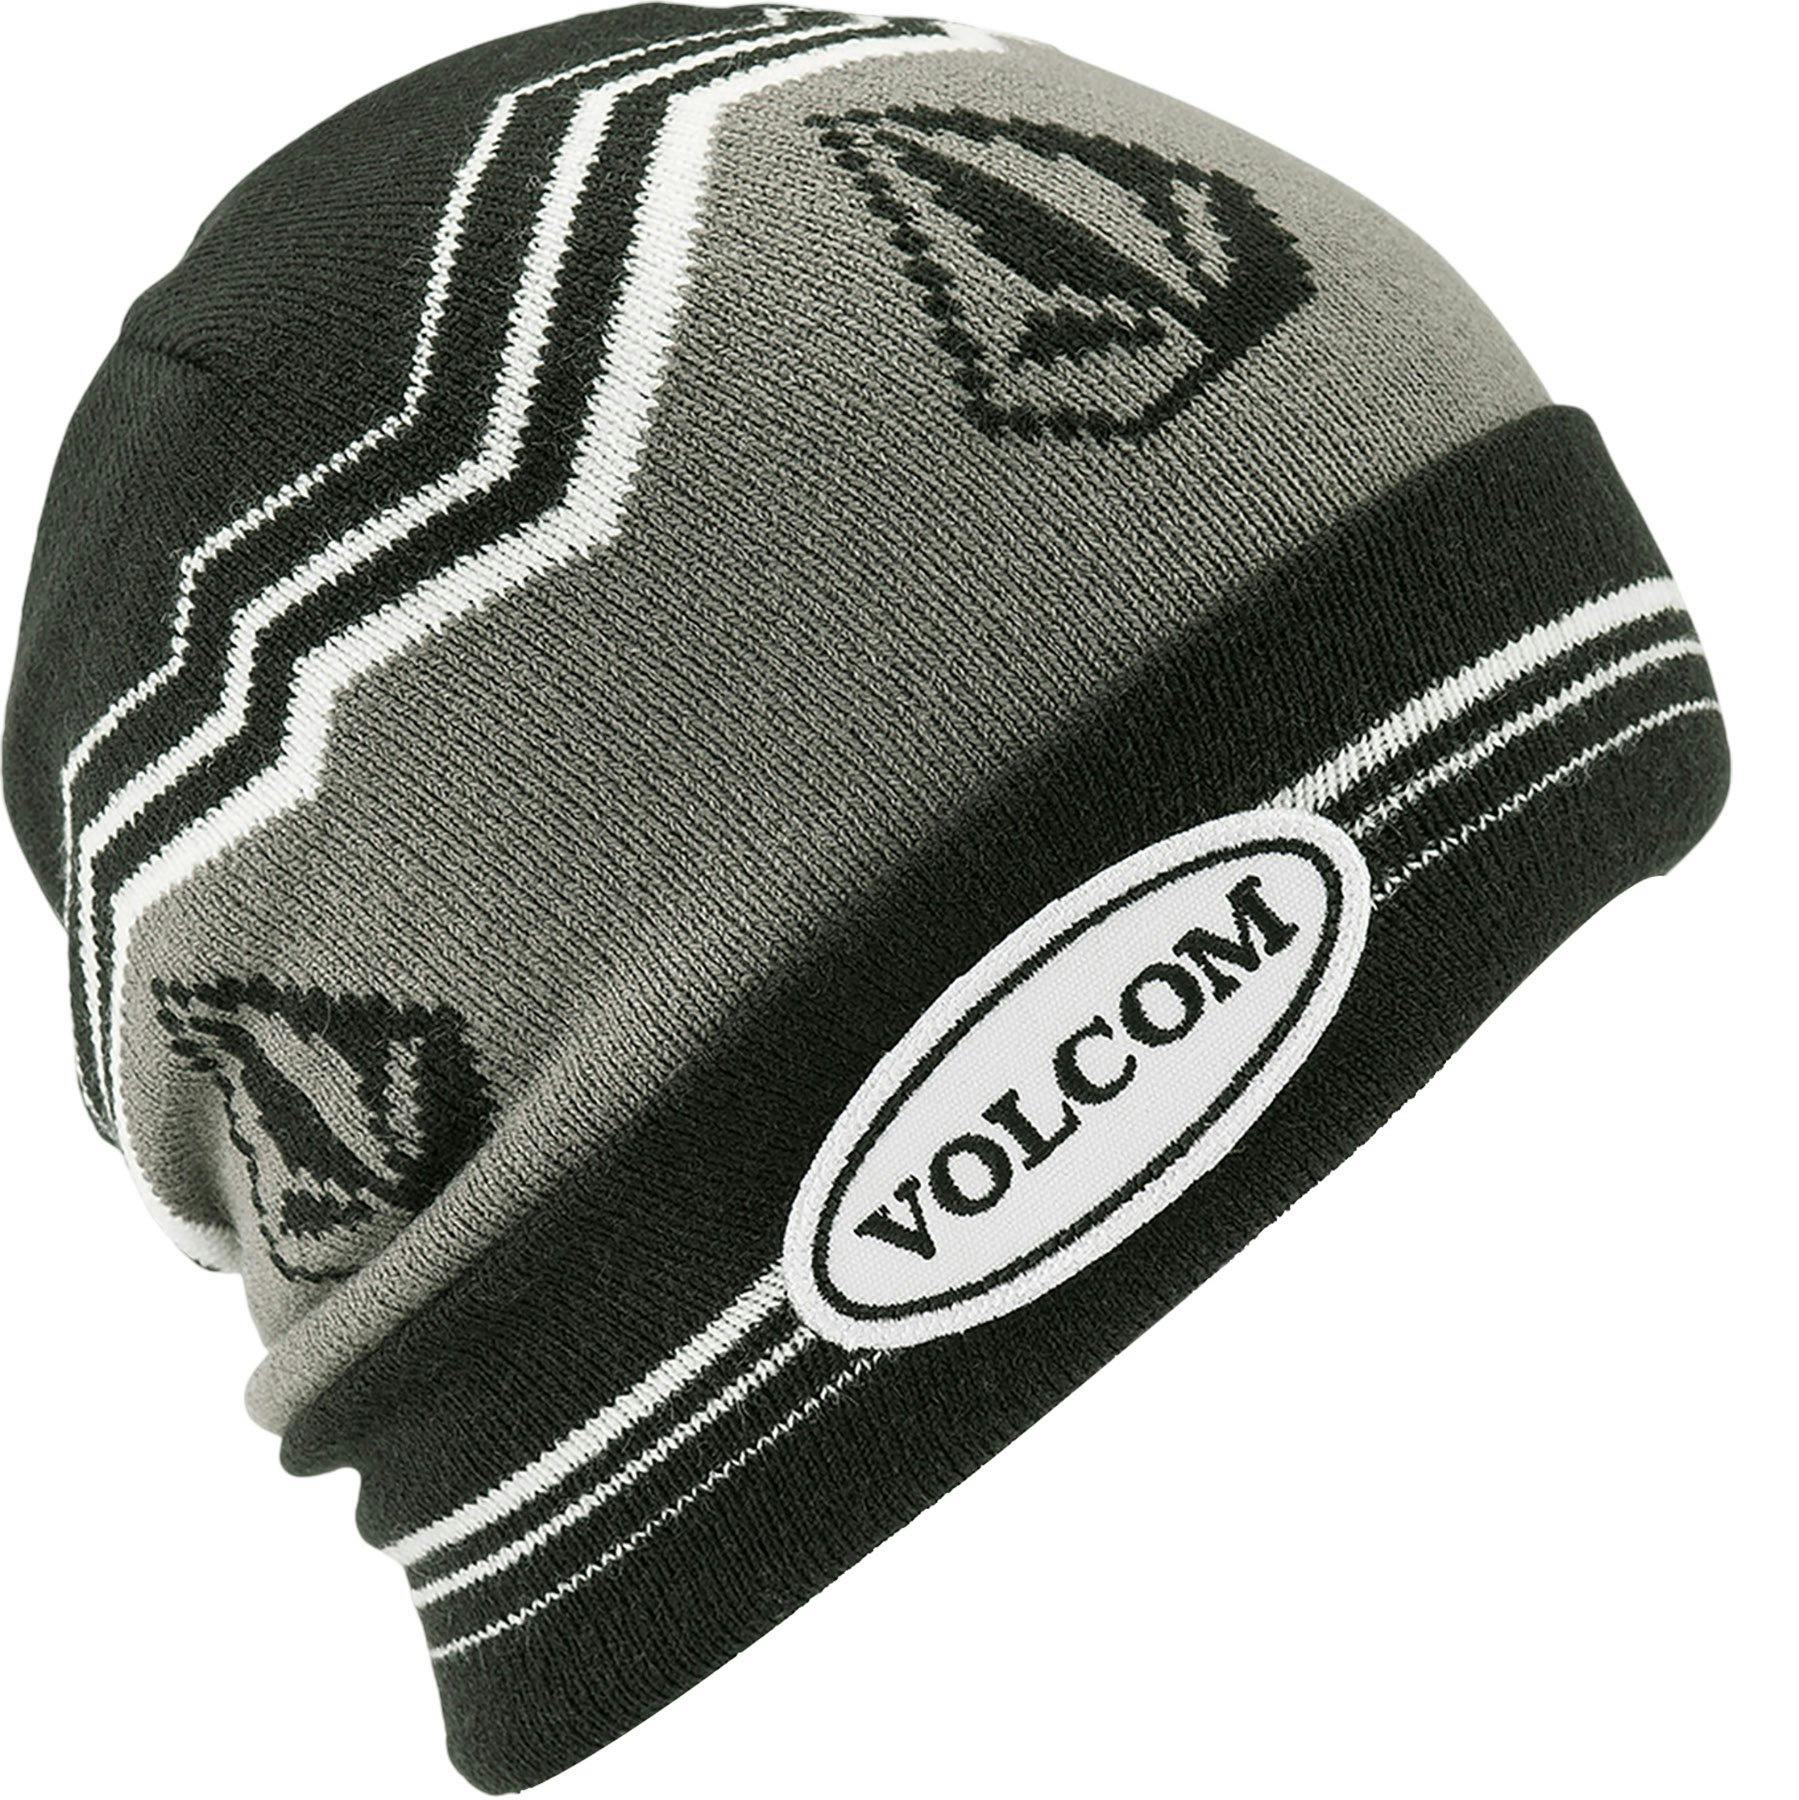 Product image for Powder Beanie - Youth